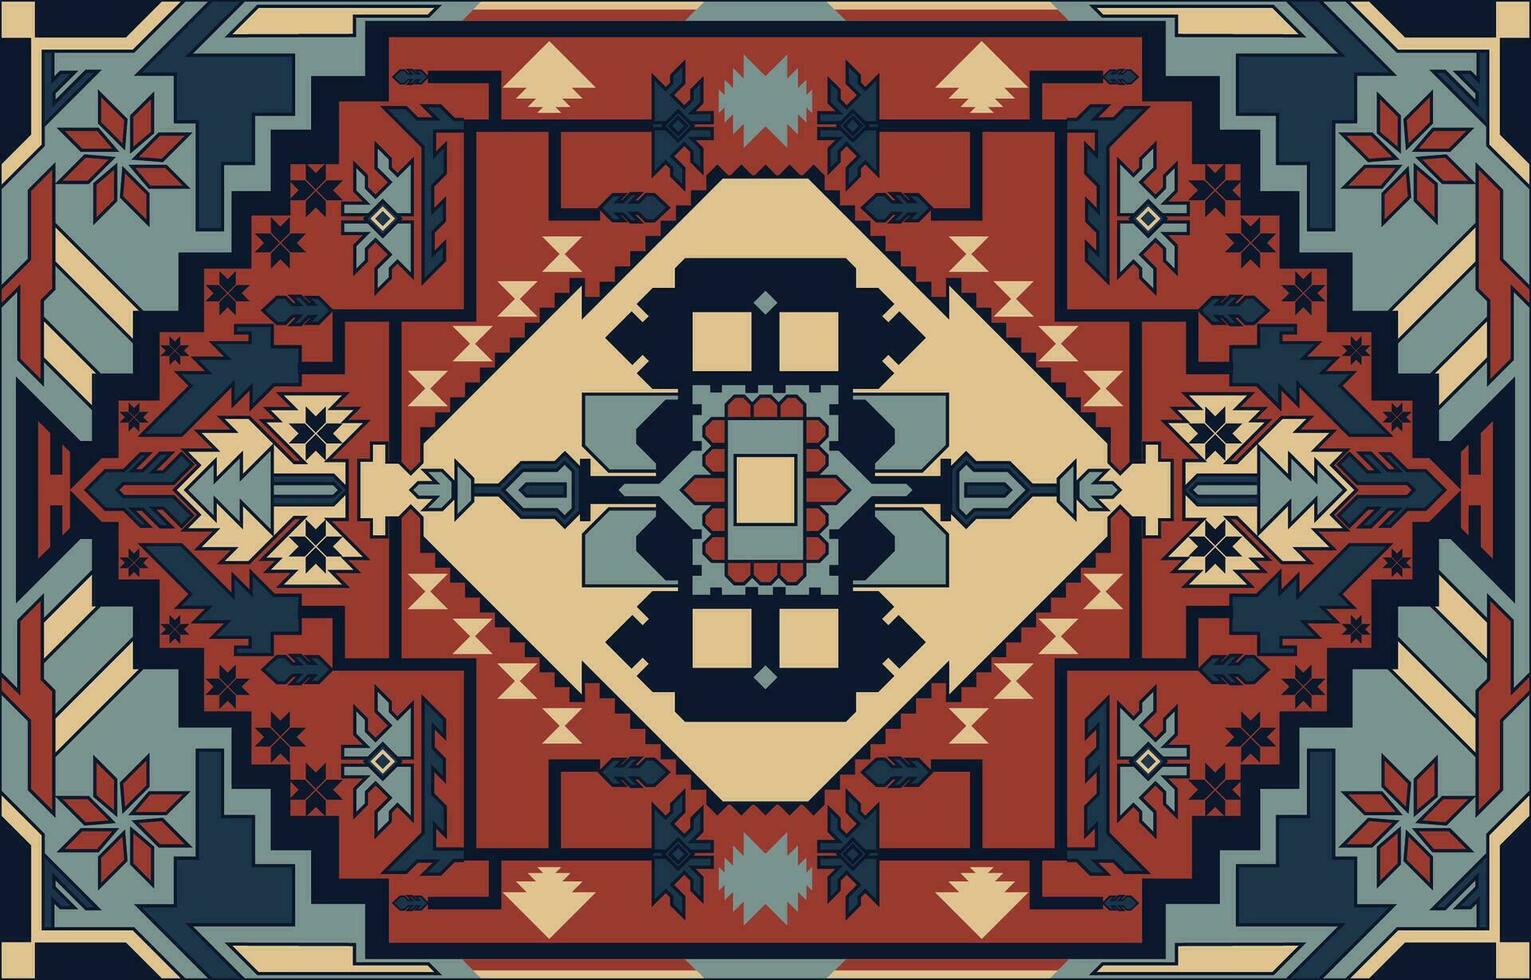 Tribal vector ornament. Seamless African pattern. Ethnic carpet with chevrons. Aztec style. Geometric mosaic on the tile, majolica. Ancient interior. Modern rug. Geo print on textile.ikat pattern